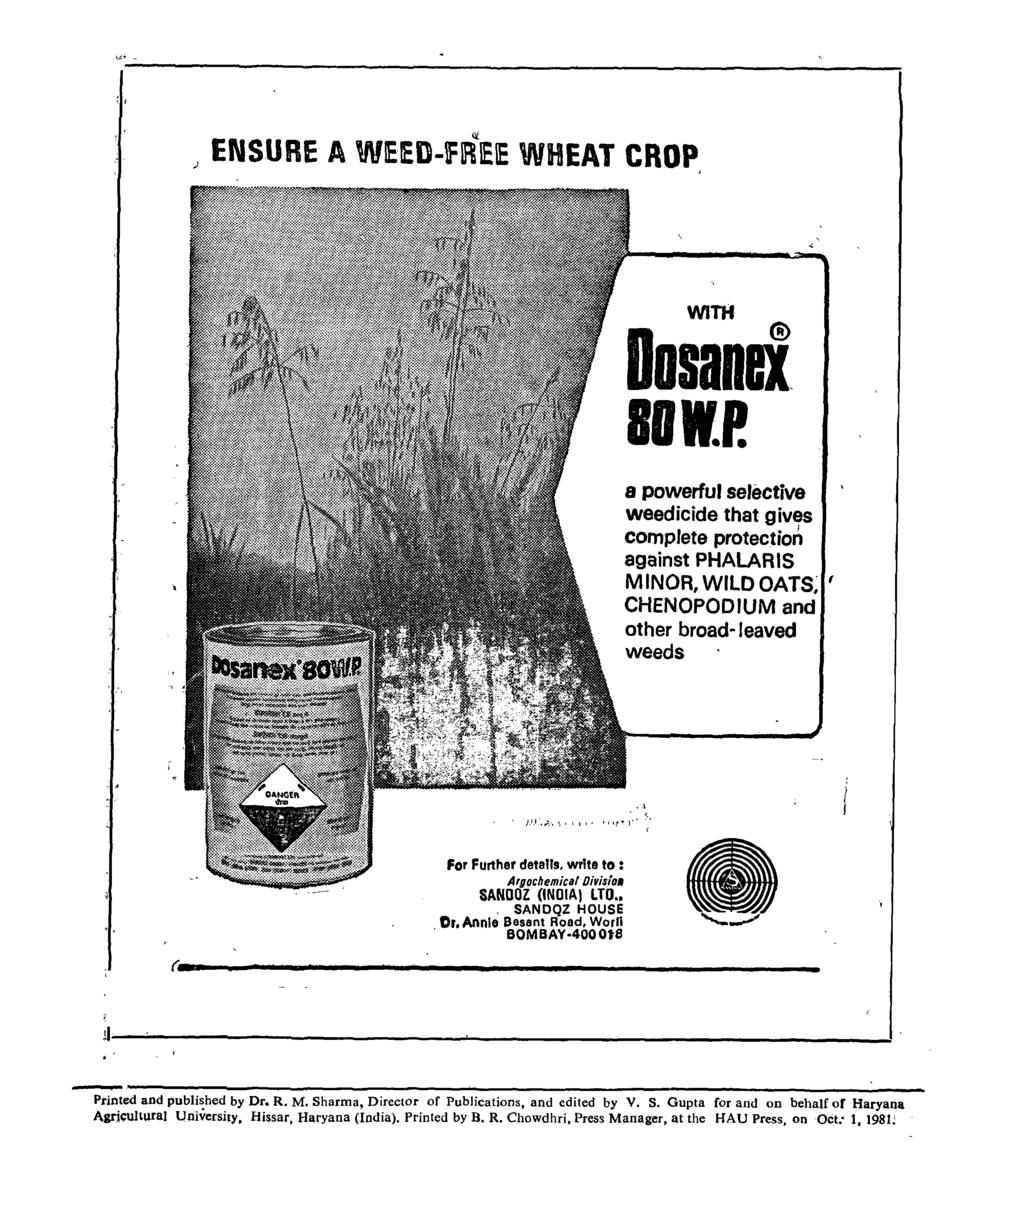 :, Ii[ ) ENSURE A WEED-fREIE WHEAT CROP WITH Do sand BOWP.